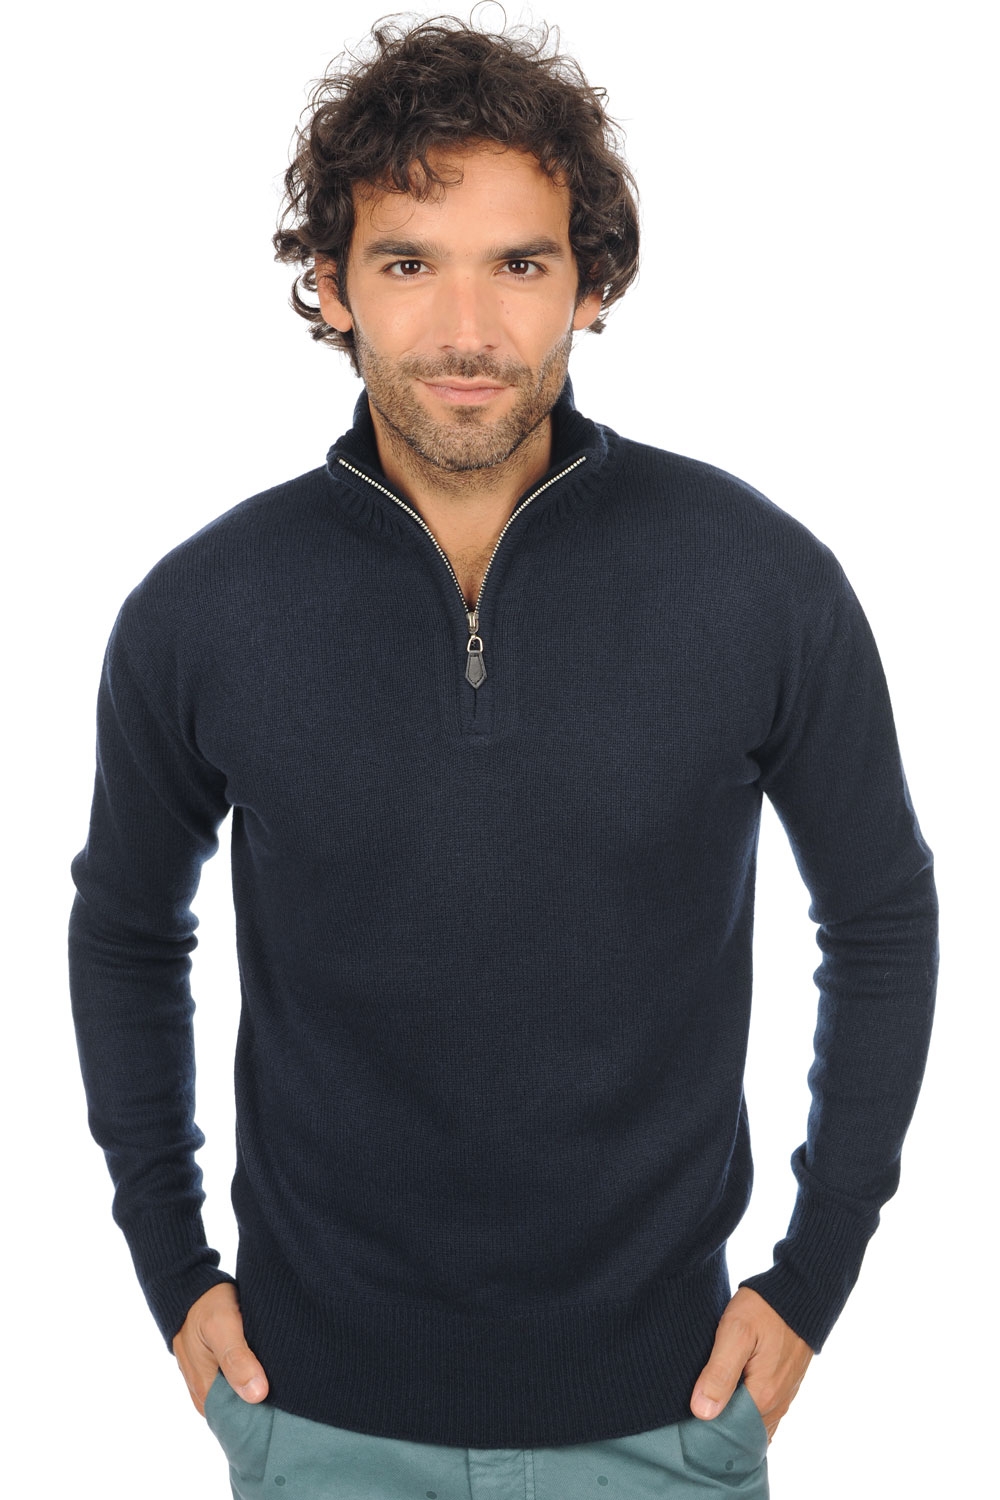 Cachemire pull homme donovan marine fonce xs